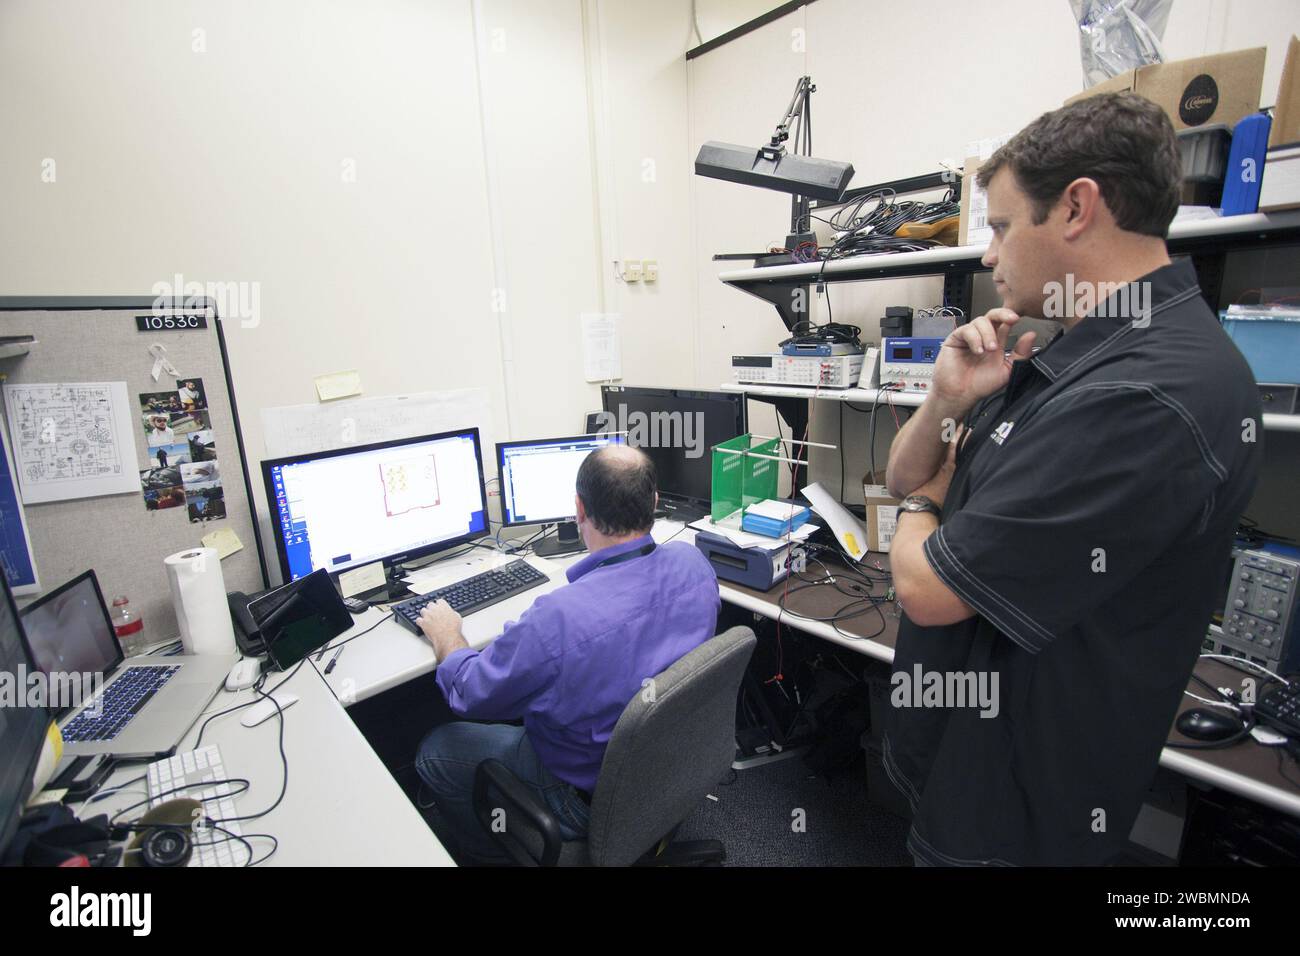 CAPE CANAVERAL, Fla. – Shaun Daly, right, and Robert Olsen test elements of a prototype of the StangSat at Kennedy Space Center before final assembly. The satellite is a small cube measuring 10 inches on all sides and will be launched on a rocket that will carry it on a suborbital mission in Mojave, Calif. Stock Photo